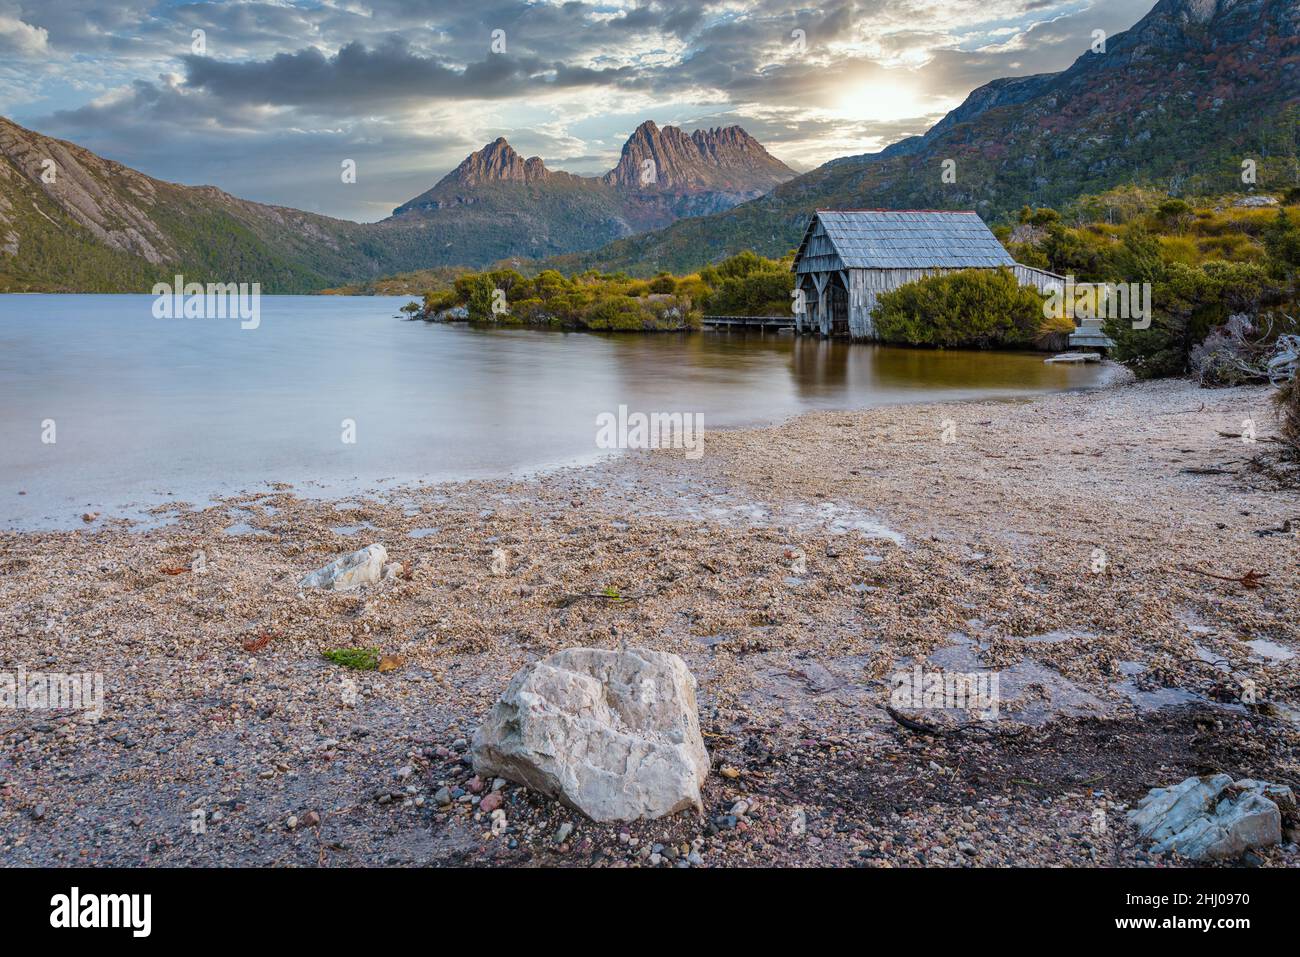 Iconic view of Dove Lake and sandy foreshore and the wooden boathouse in the Cradle Mountain National Park in Tasmania, Australia. Stock Photo